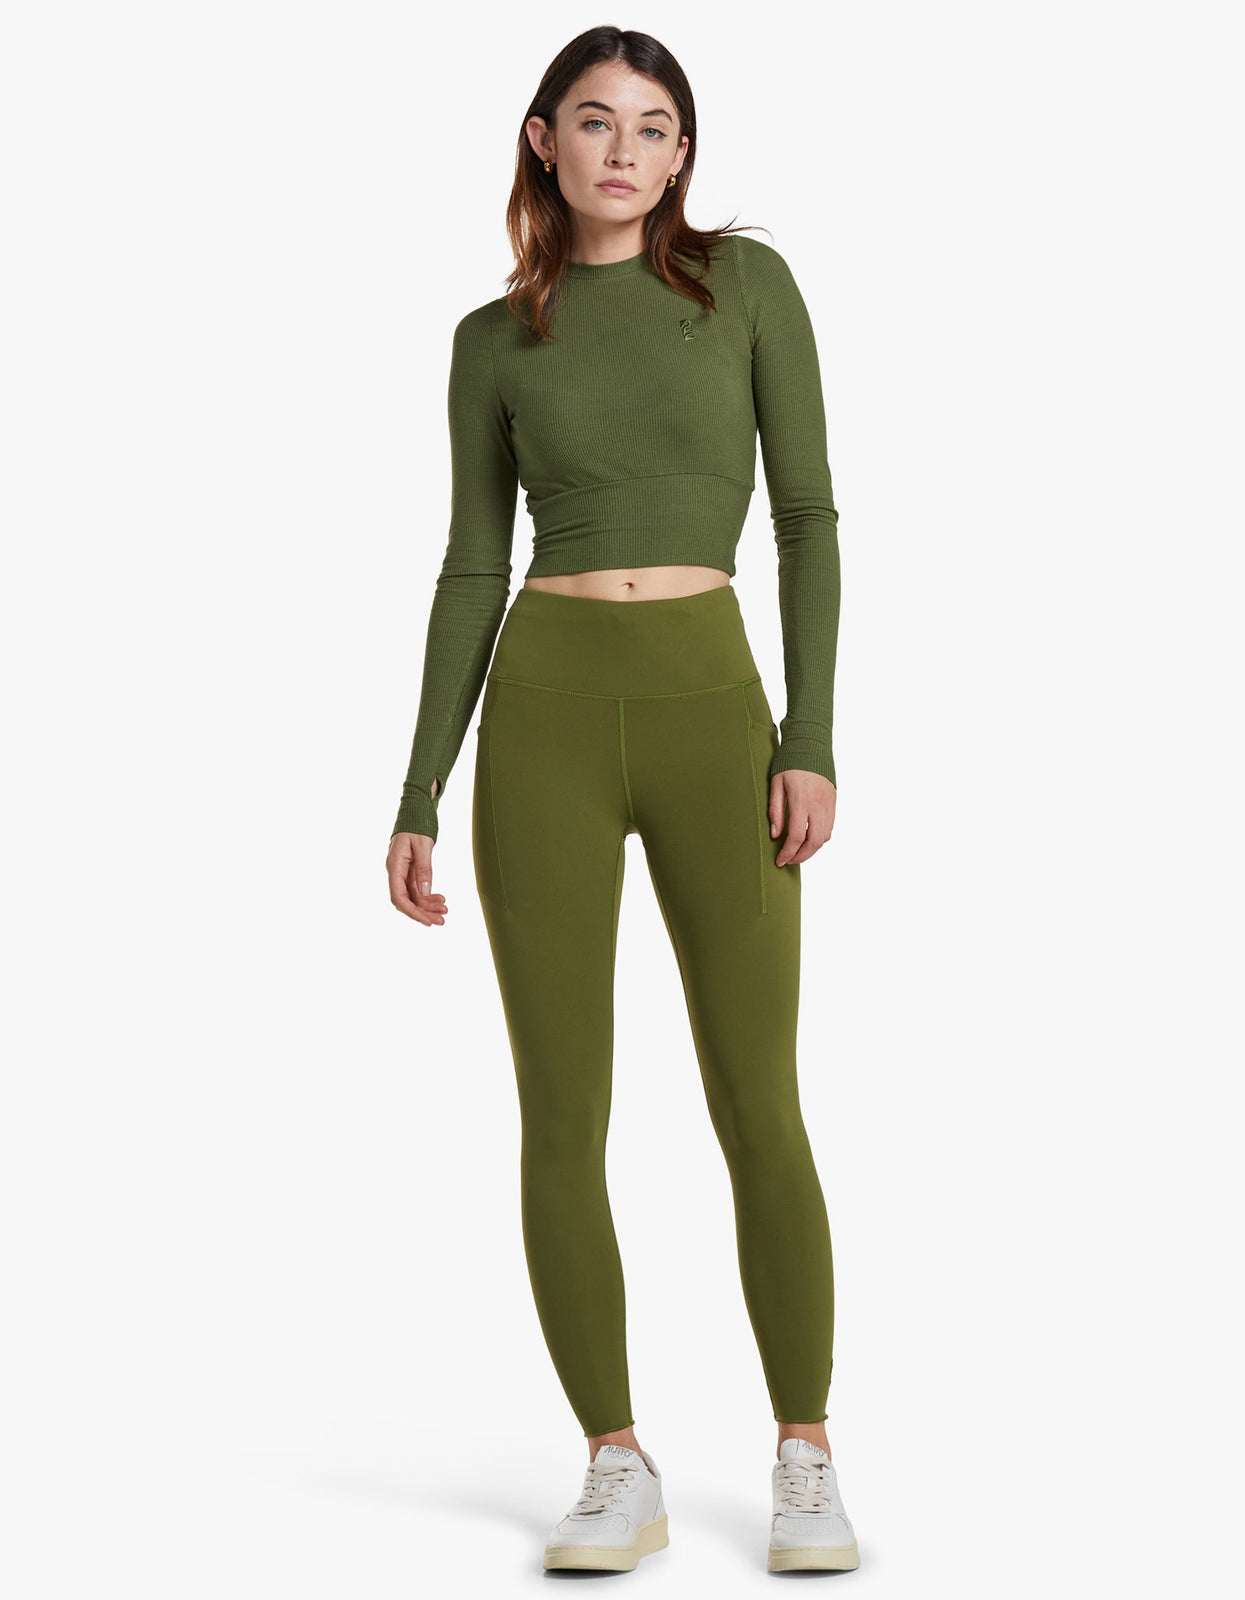 Short Body Shapes Leggings For Women Over 60  International Society of  Precision Agriculture